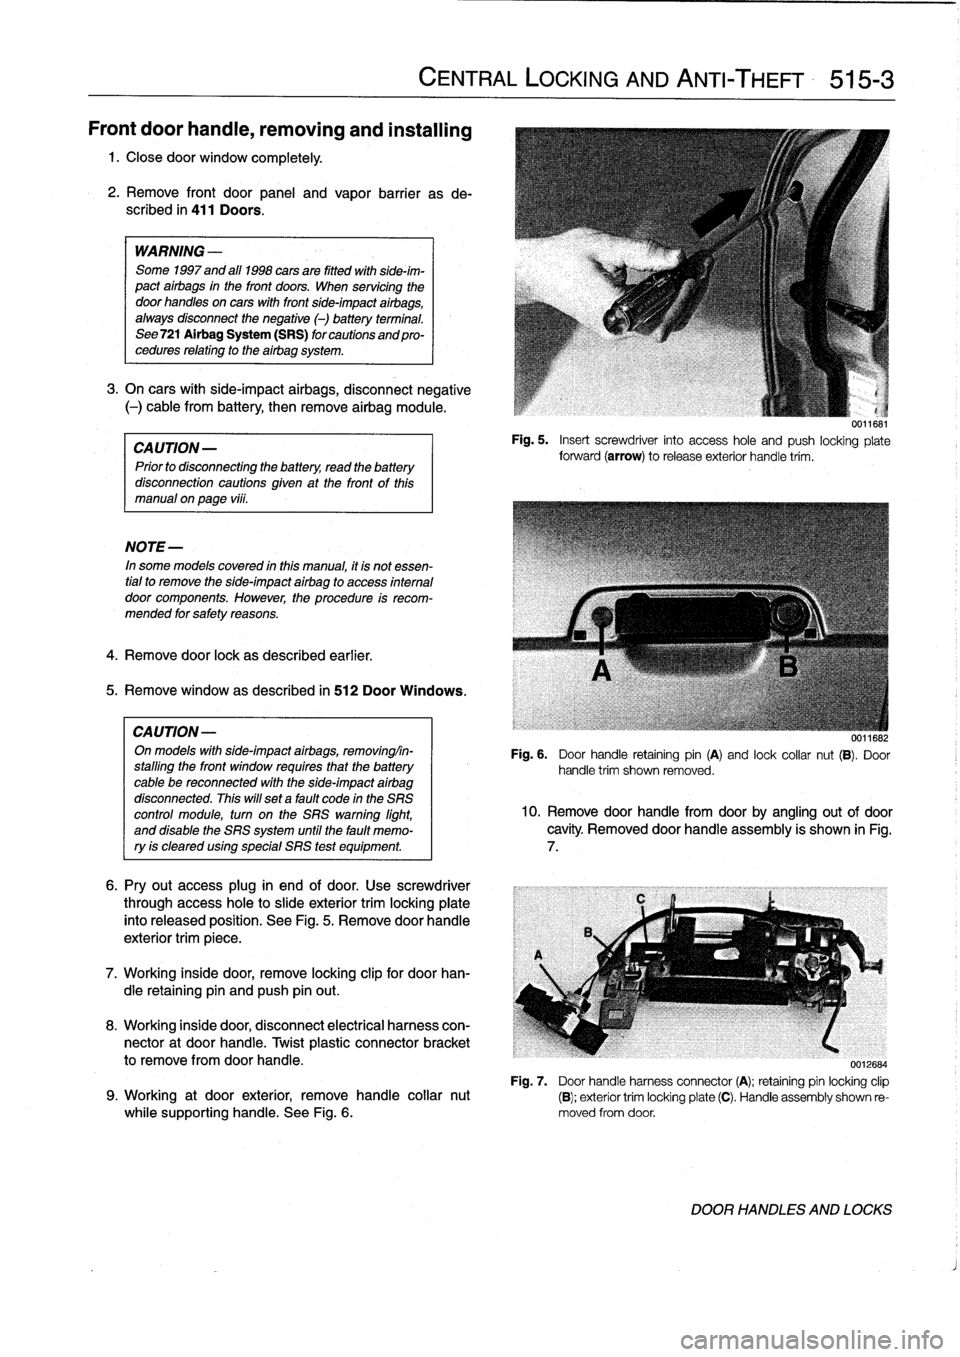 BMW 325i 1997 E36 Workshop Manual 
Front
door
handle,
removing
and
installing

1
.
Closedoor
window
completely
.

2
.
Remove
front
door
panel
and
vapor
barrier
asde-
scribed
in
411
Doors
.

WARNING
-

Some
1997
and
al]
1998
cars
are
f